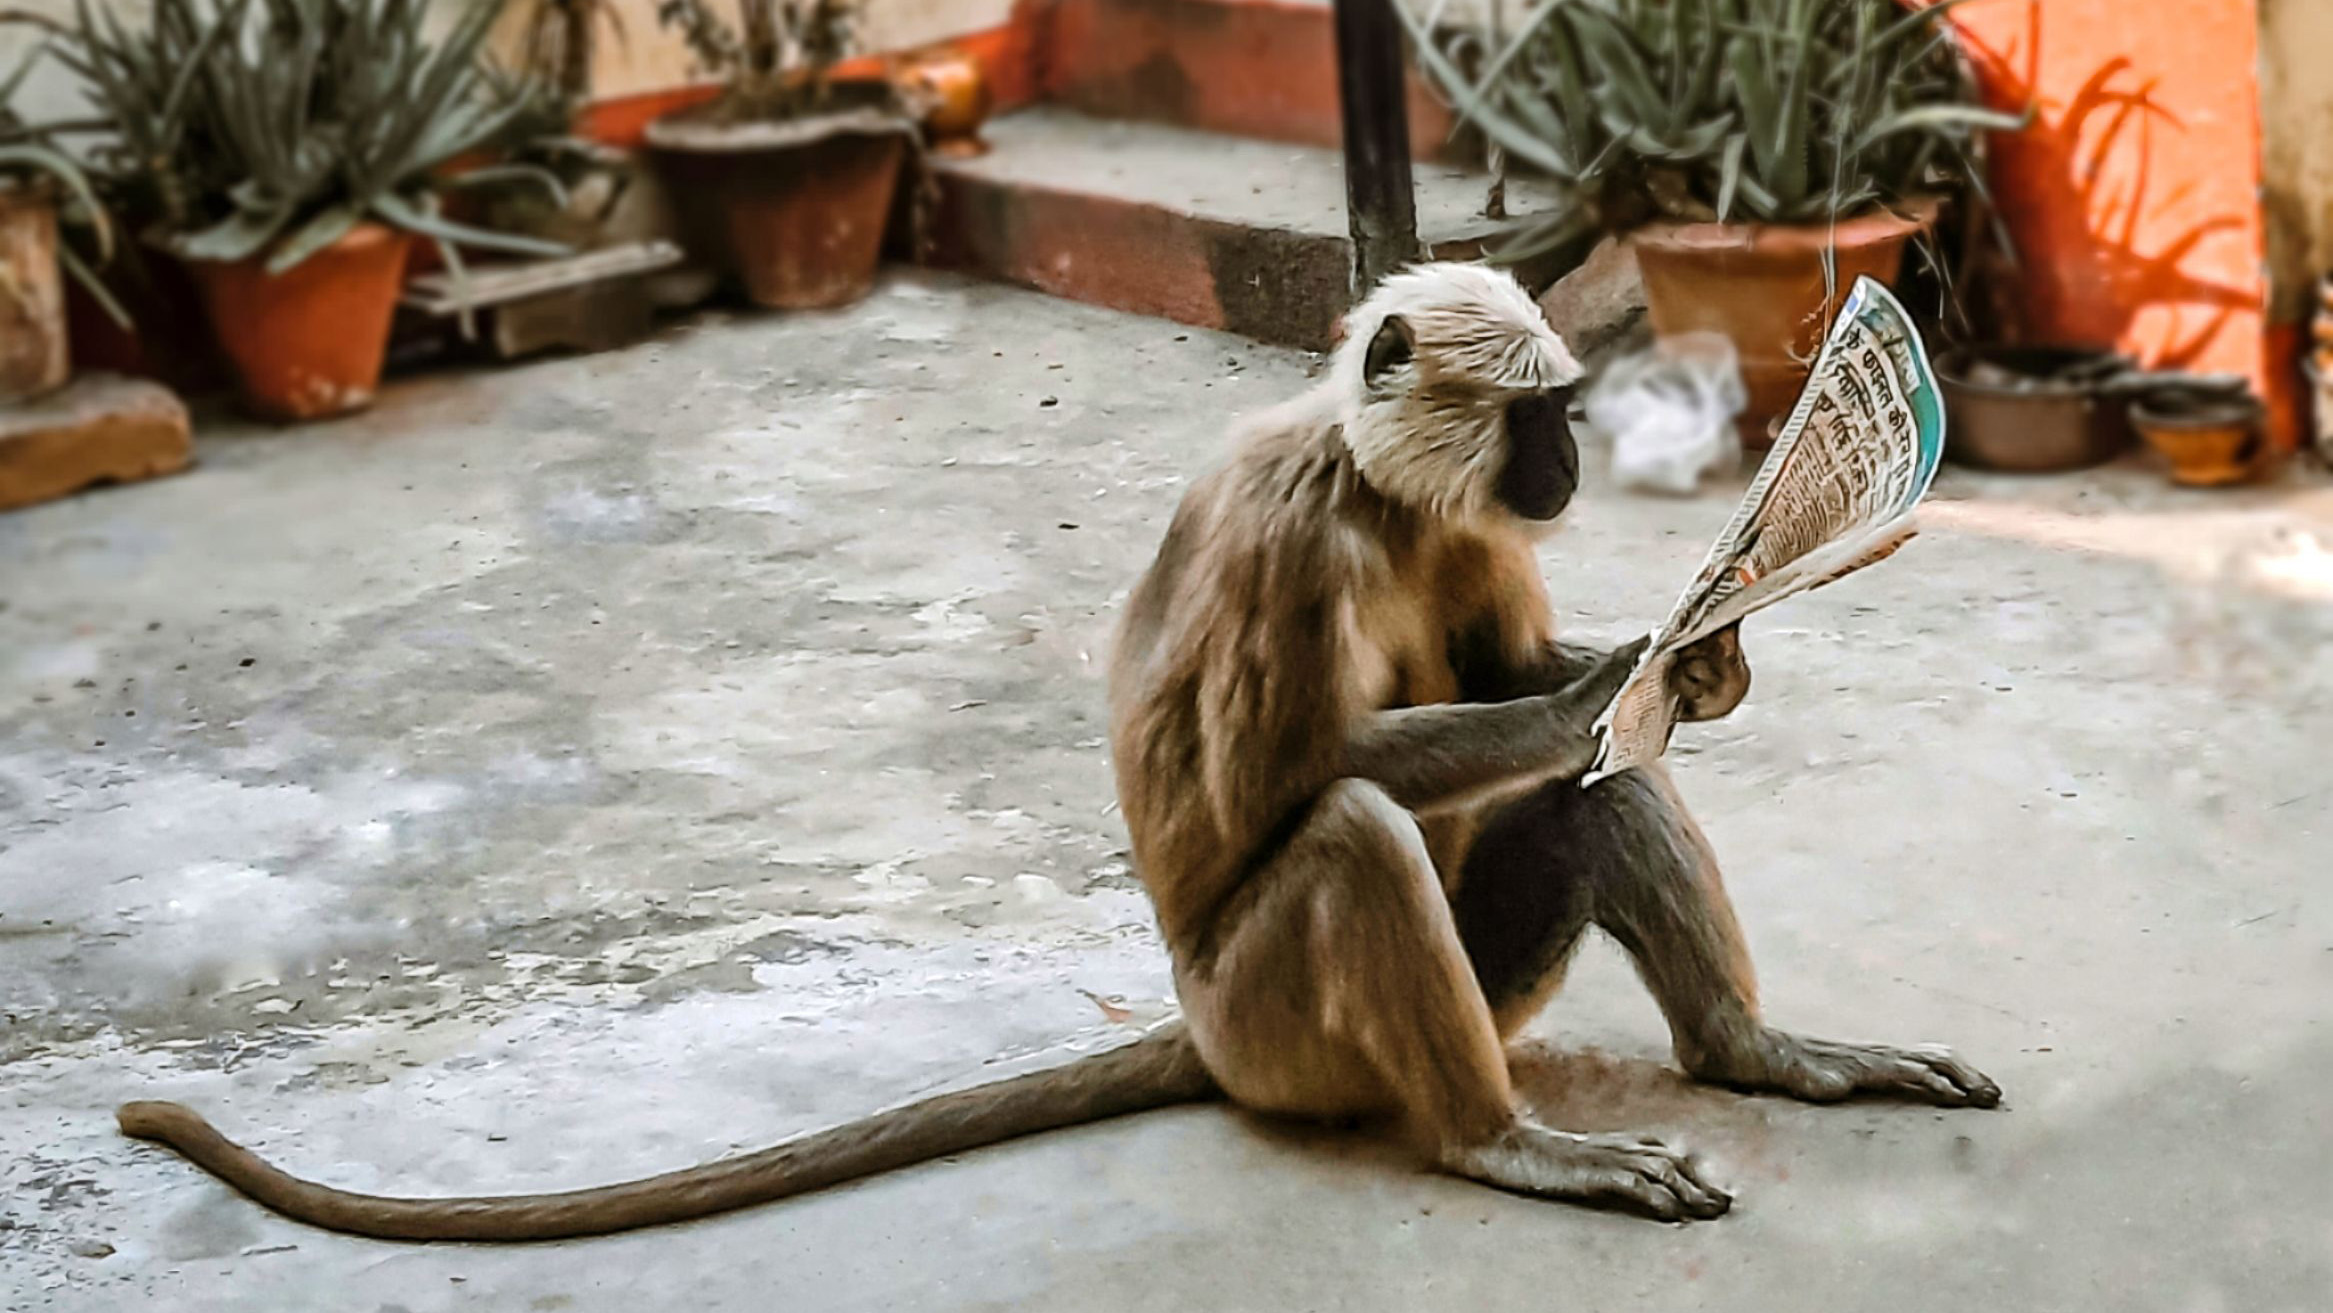 This Pic of a Monkey Reading Begs to be a Meme. Send Us Your Versions